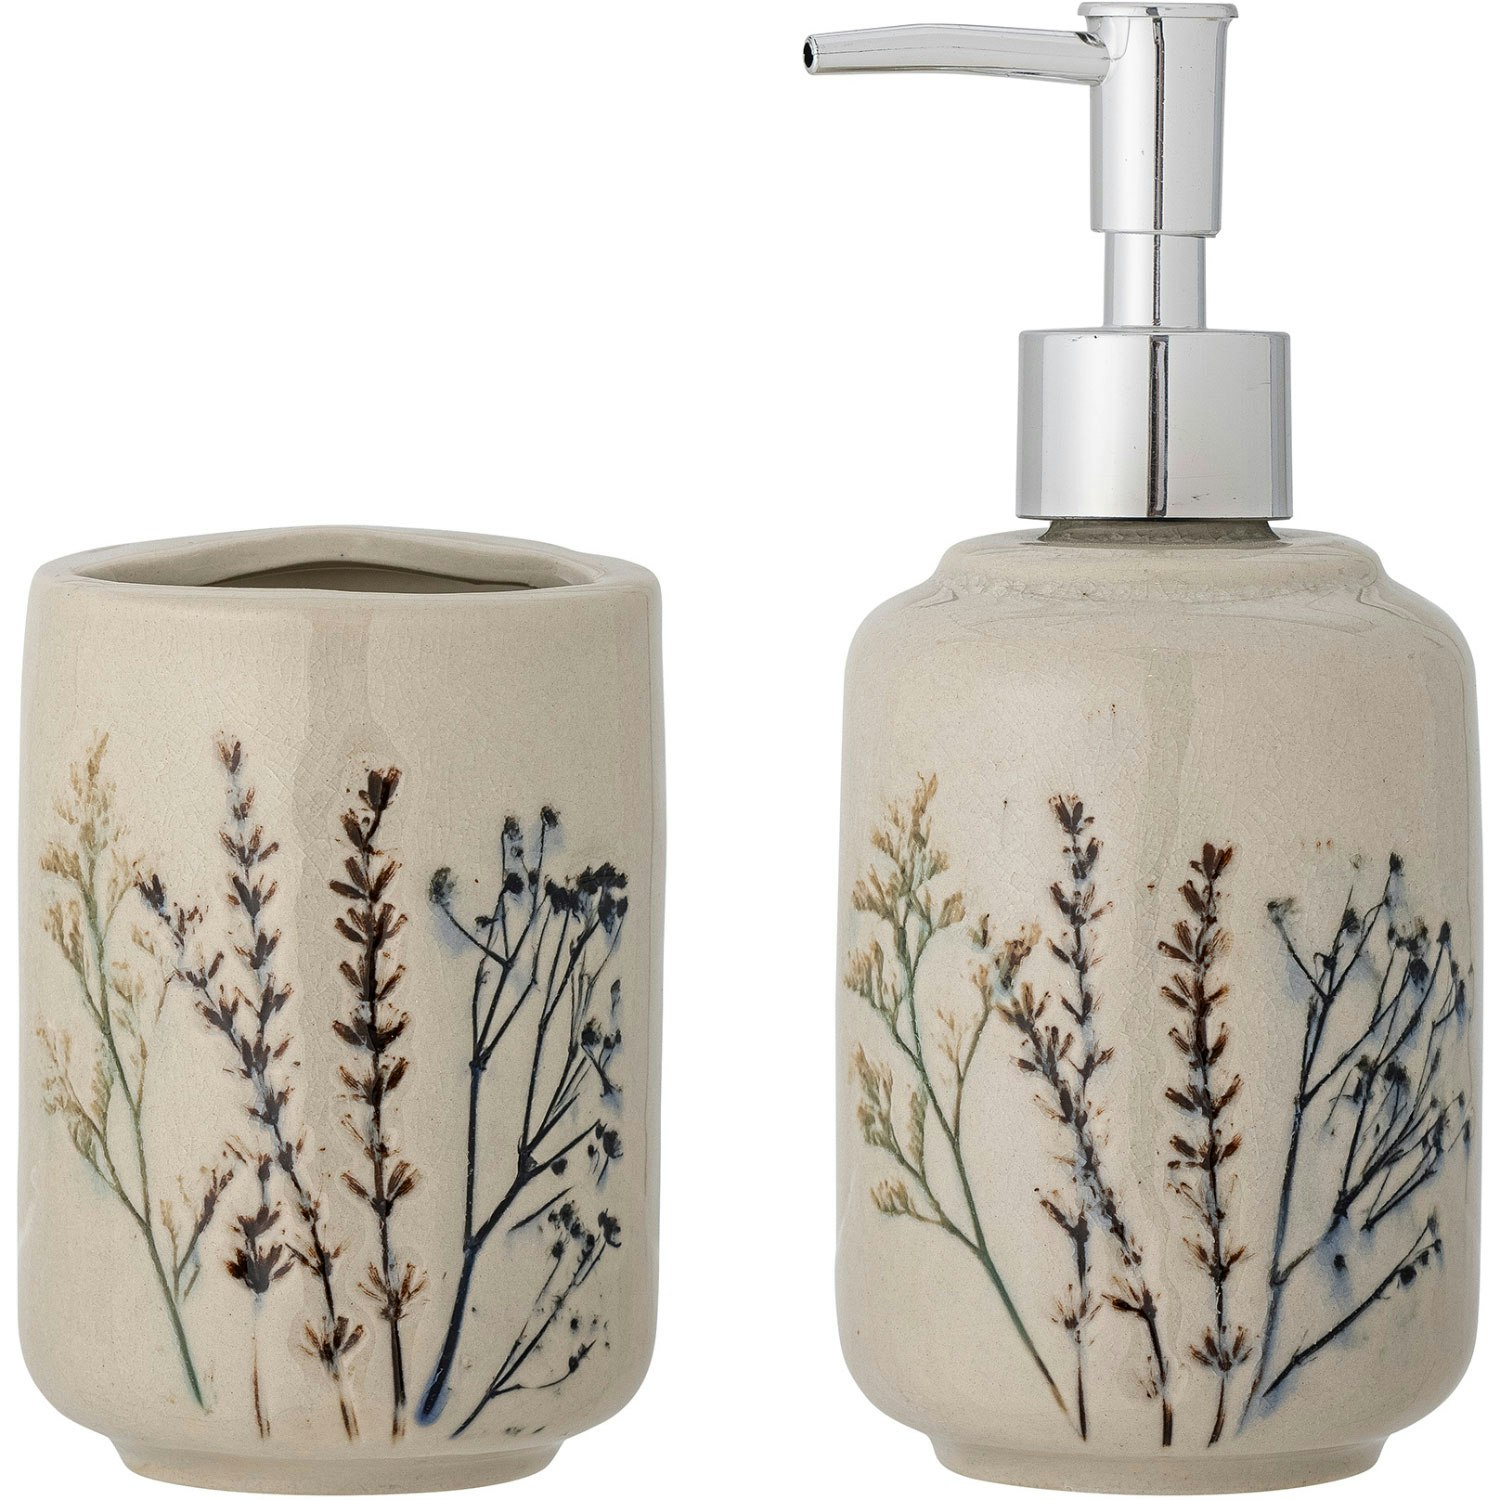 Bea Bathroom Set With Soap Dispenser + Toothbrush Holder 2 Pieces